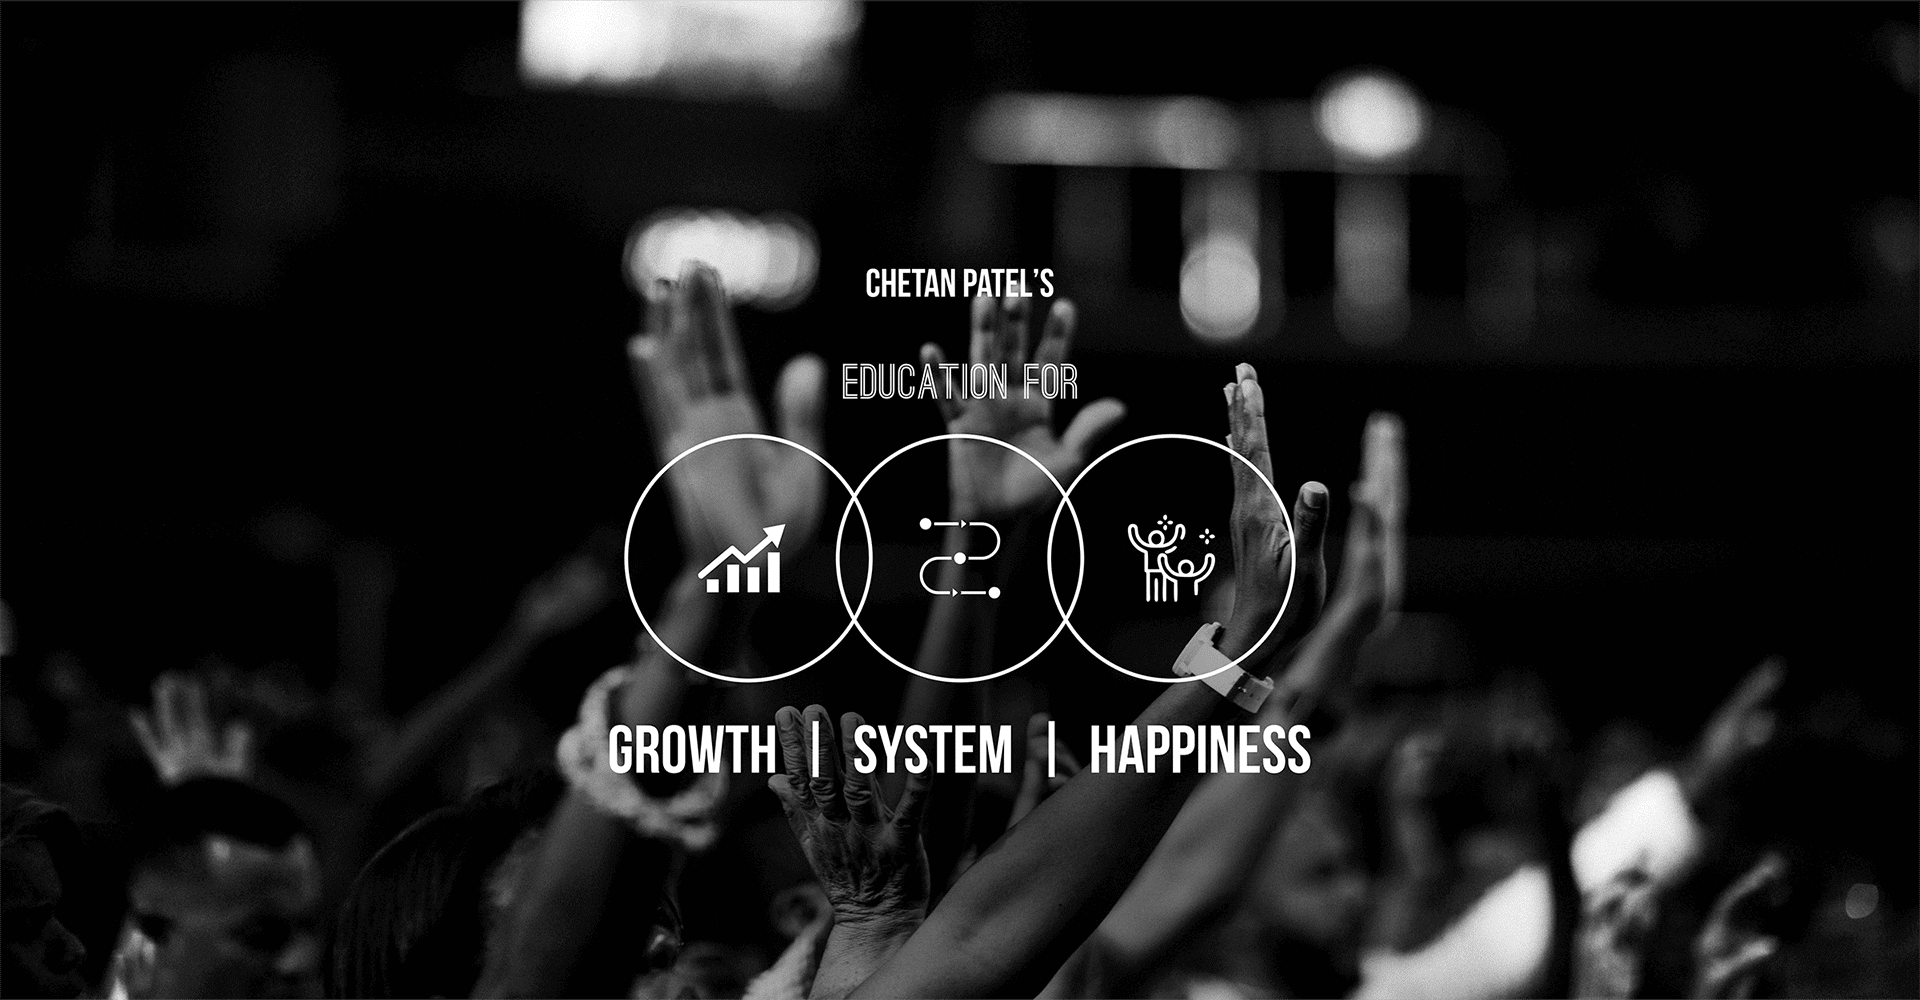 Chetan patel growth systems happiness